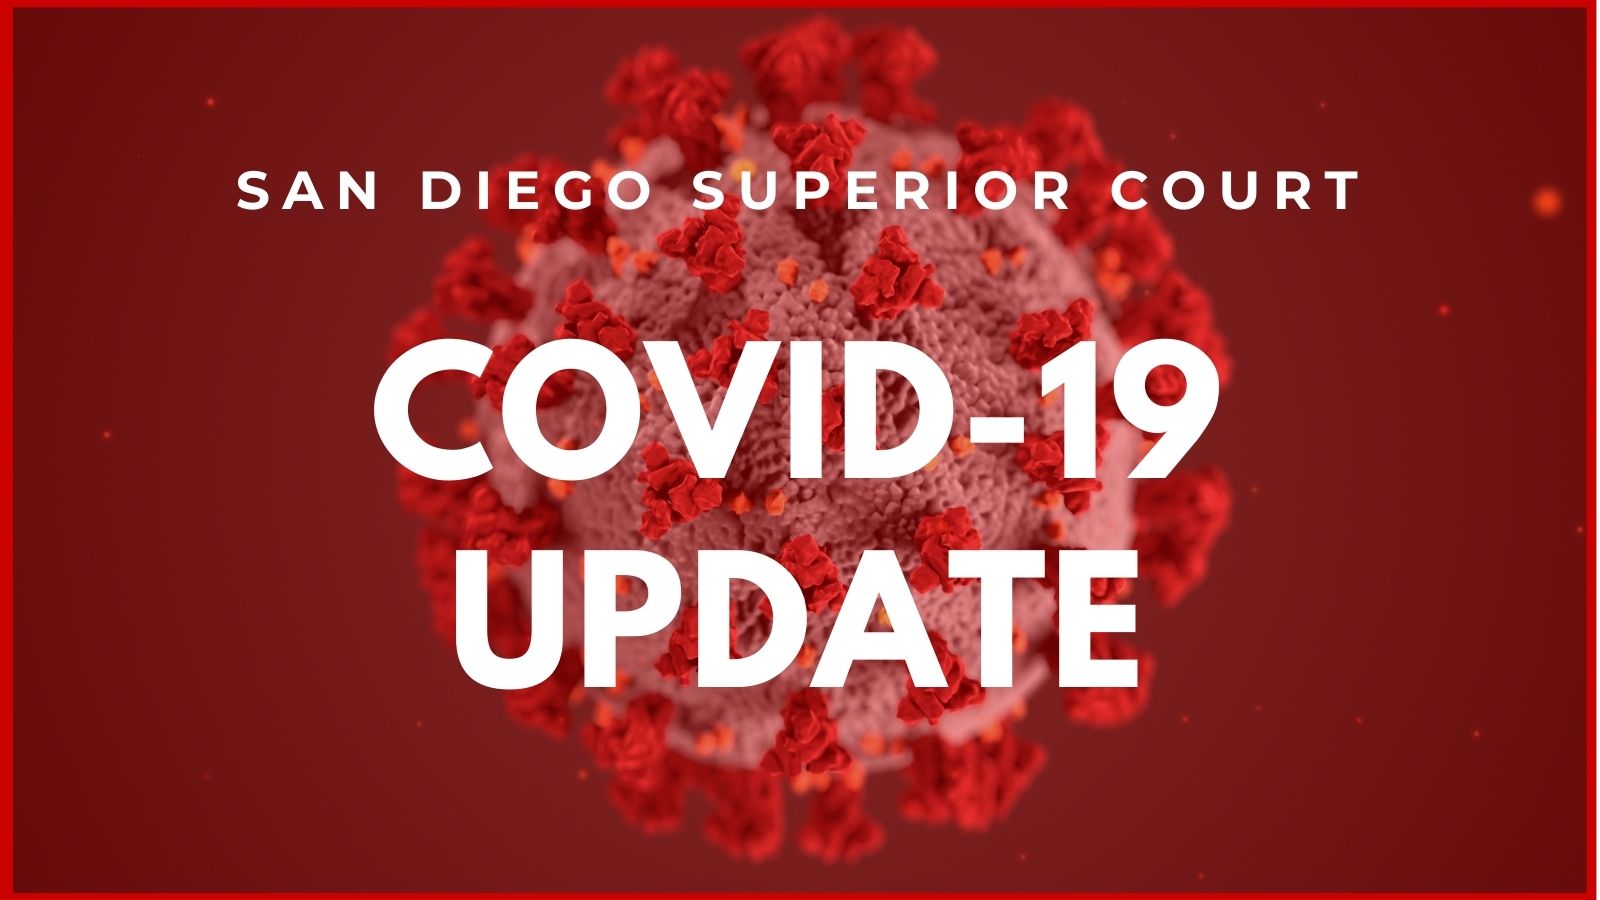 San Diego Superior Court to Resume Additional In-Person Services and Relax Previous COVID-19 Restrictions